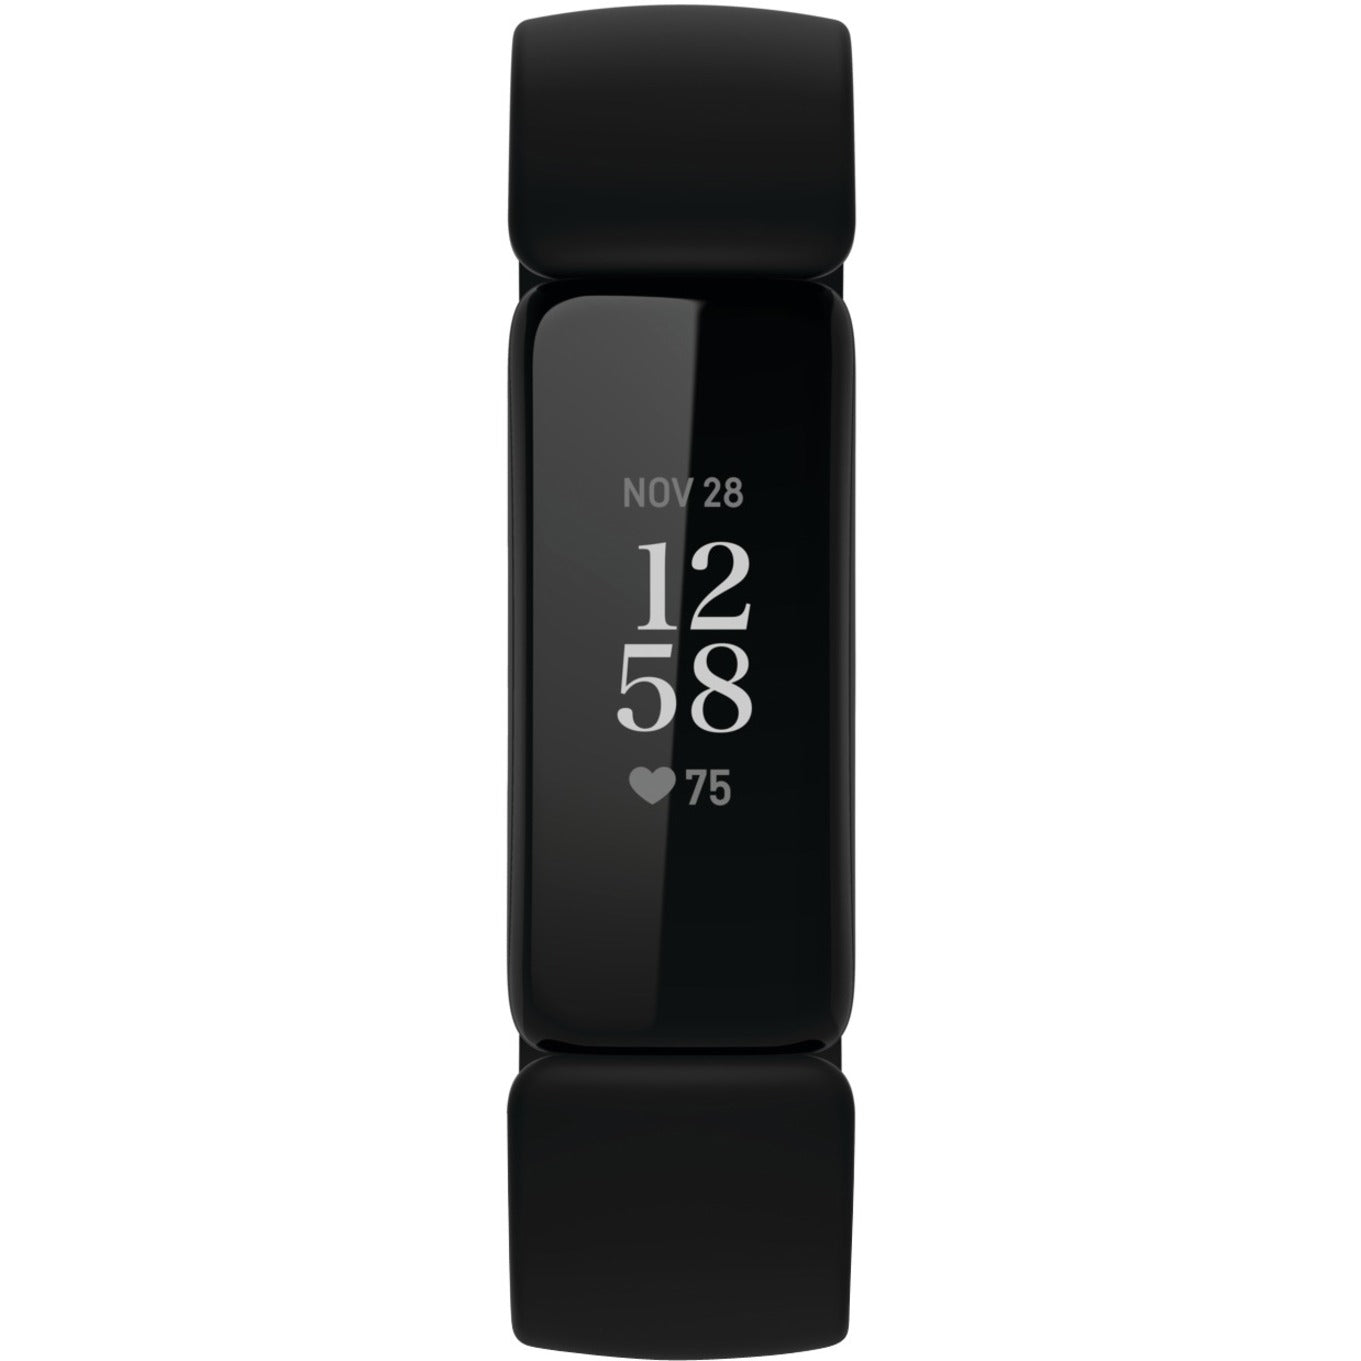 Fitbit FB418BKBK Inspire 2 Smart Band, Health & Fitness Tracker, OLED Touchscreen, Water Resistant, 1 Year Warranty